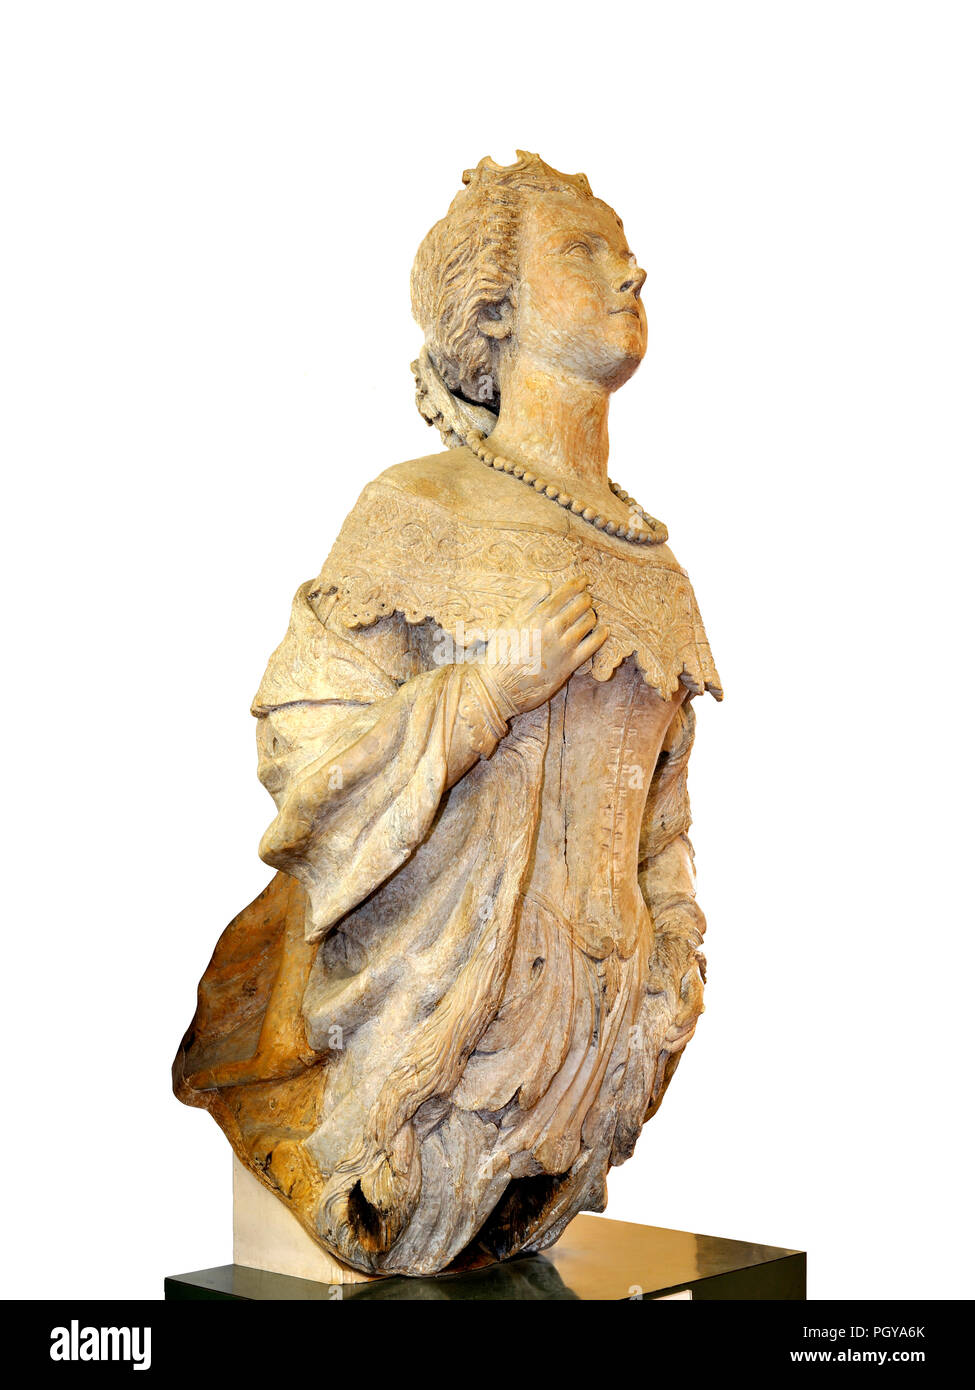 figurehead of I.R.N. Elisabeth Kaiserin (Wagon Steamer) 1.40 m high Represented atre Quarter of the figure The Empress of Austria at an early age. She was installed on the aruote steamer bearing the name of the empress, built in 1861 in Pula in Lissa. Stock Photo